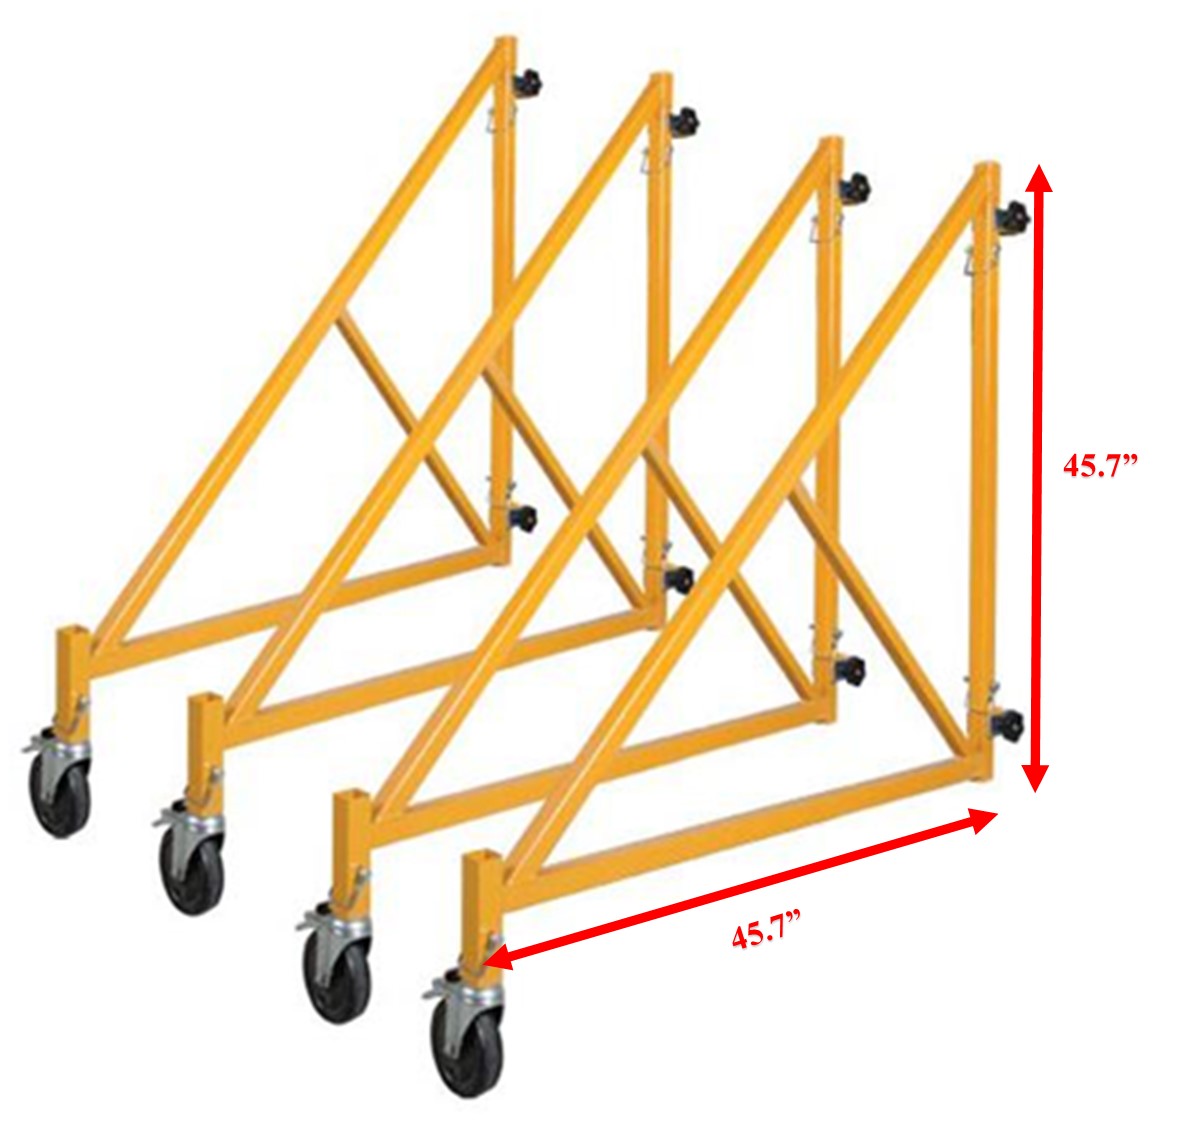 46" Outriggers for Scaffold